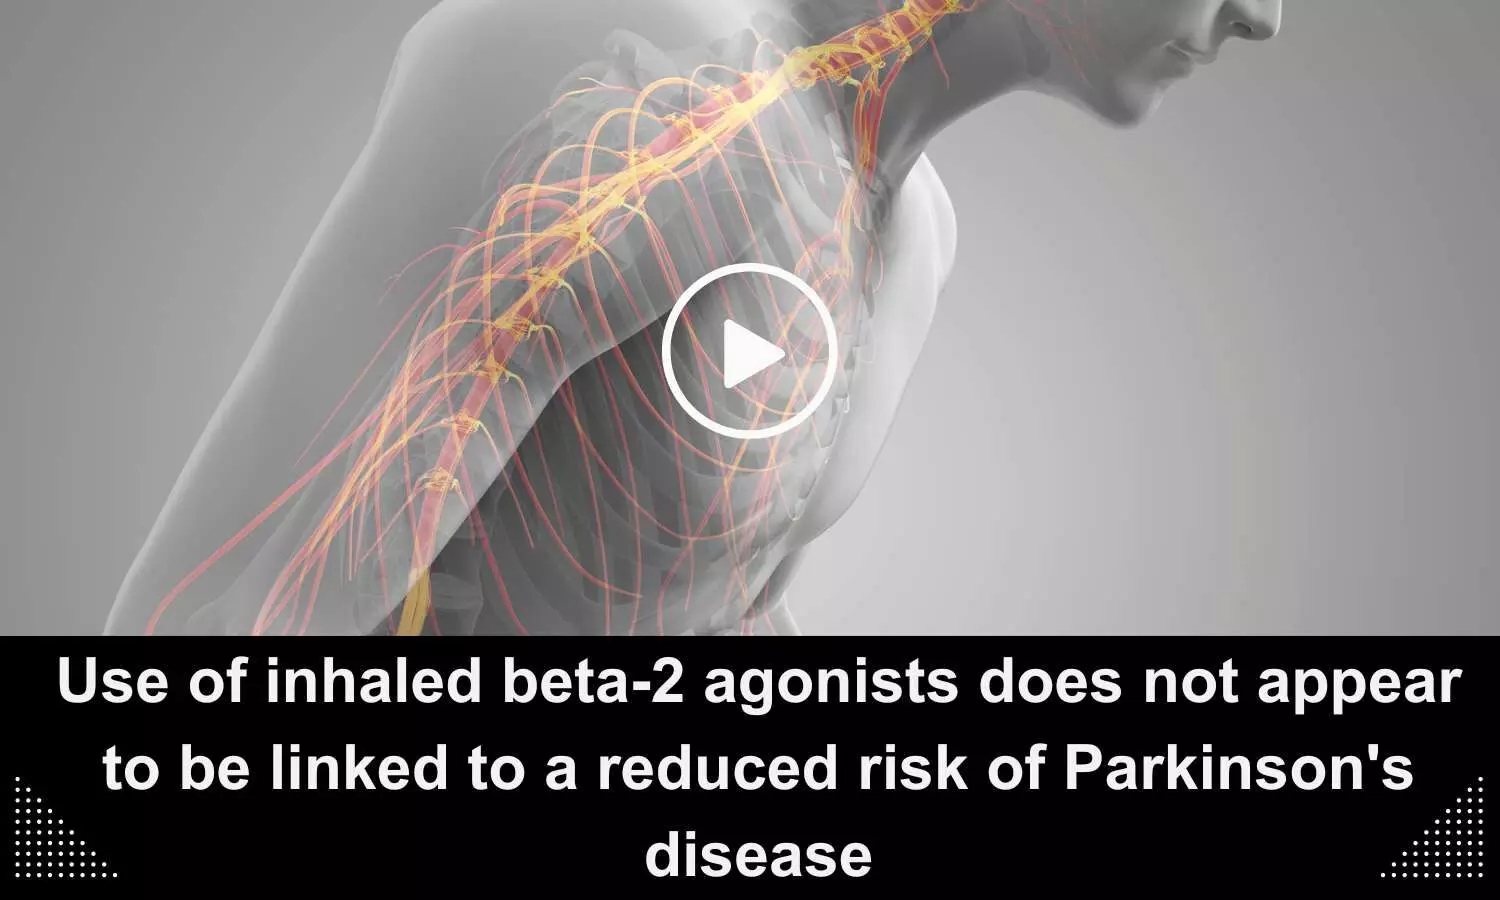 Use of inhaled beta-2 agonists  not linked to a reduced risk of Parkinsons disease.